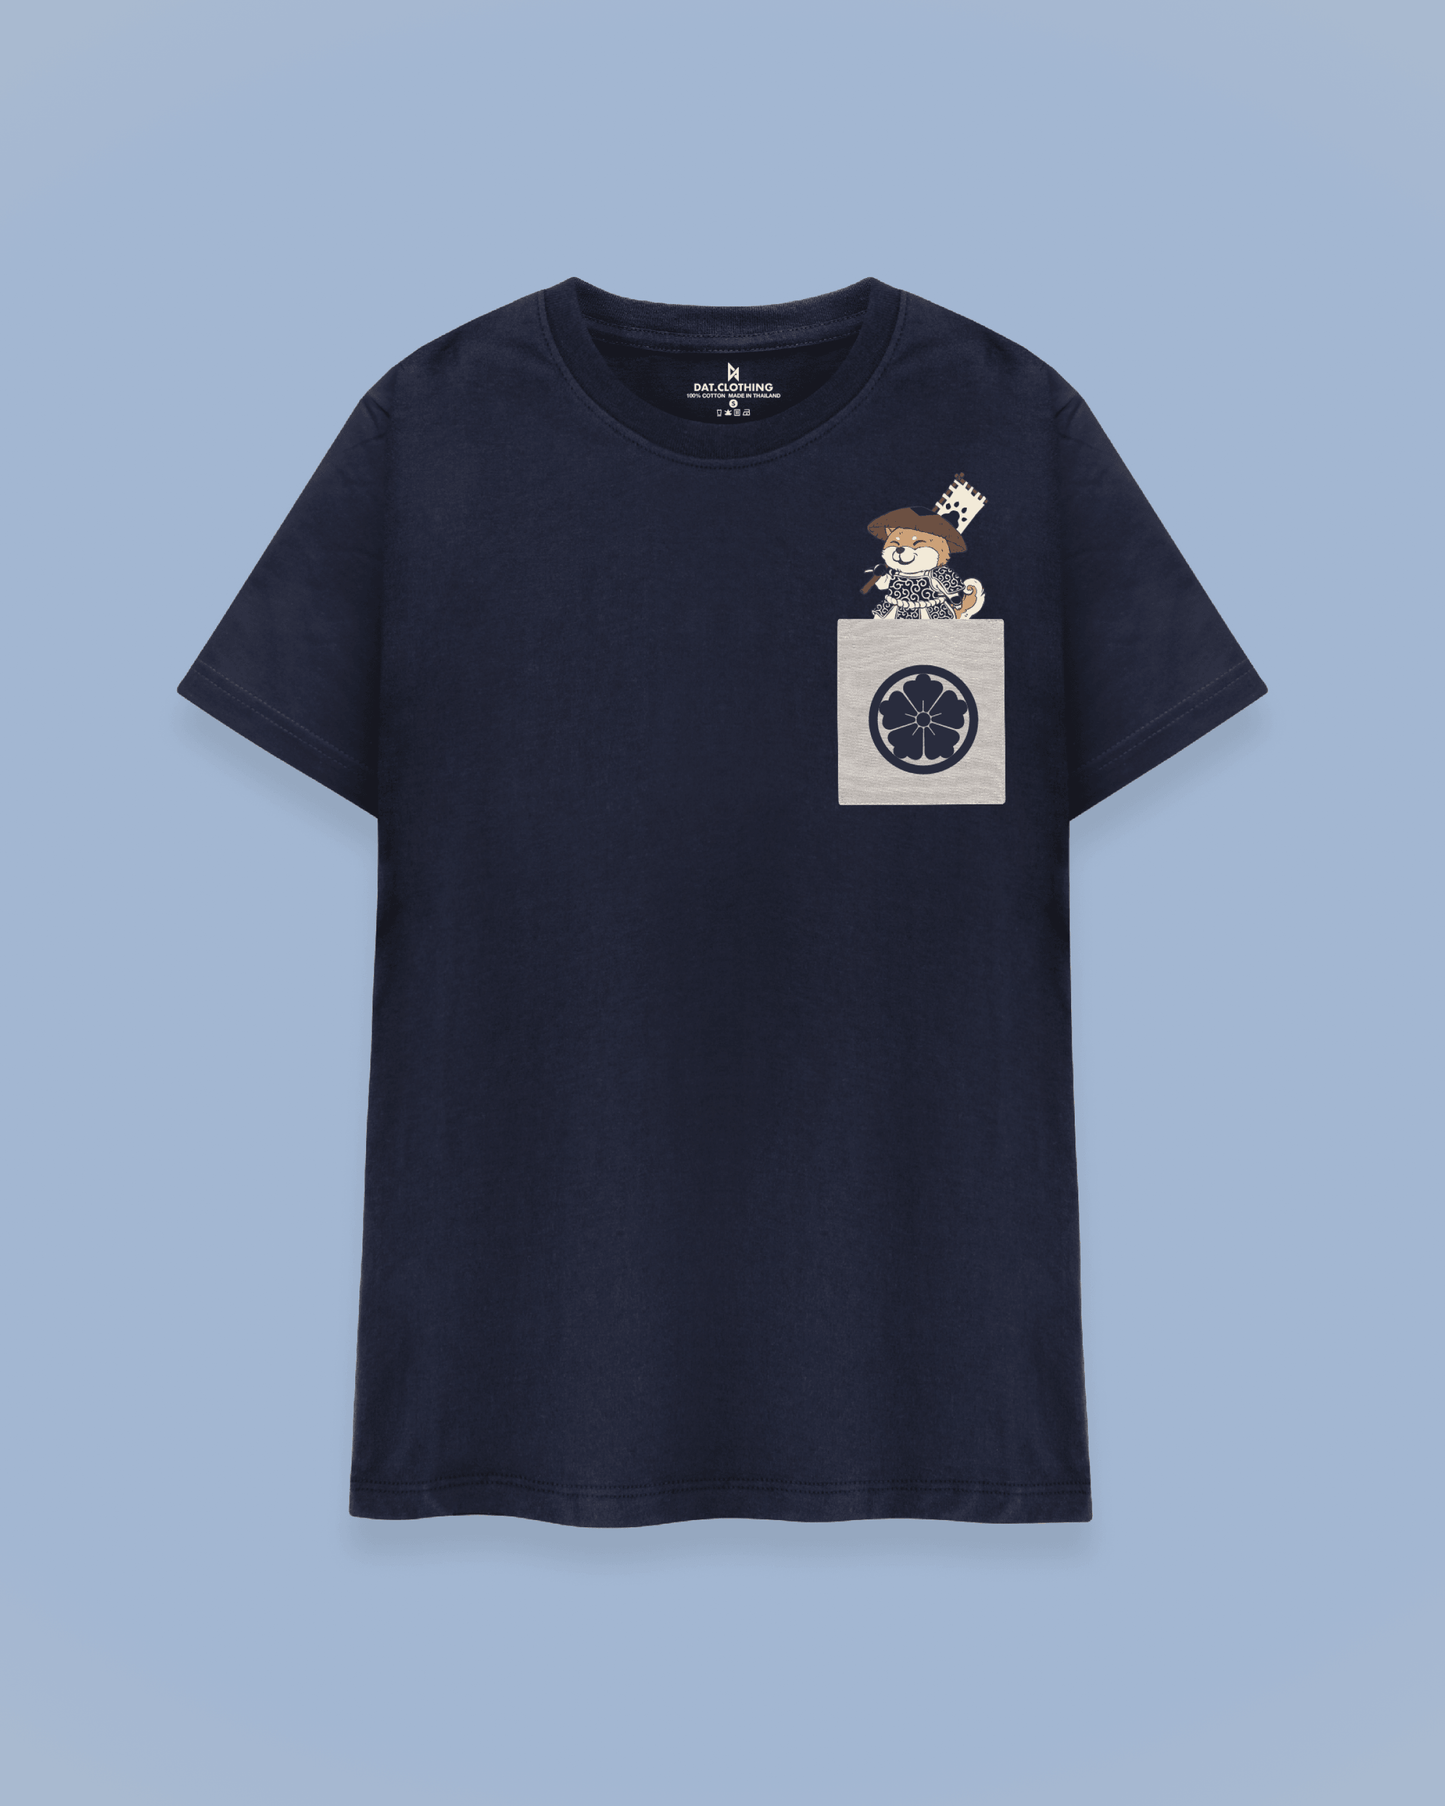 Datclothing - Shiba inu in samurai outfit print with pocket - navy blue T-shirt